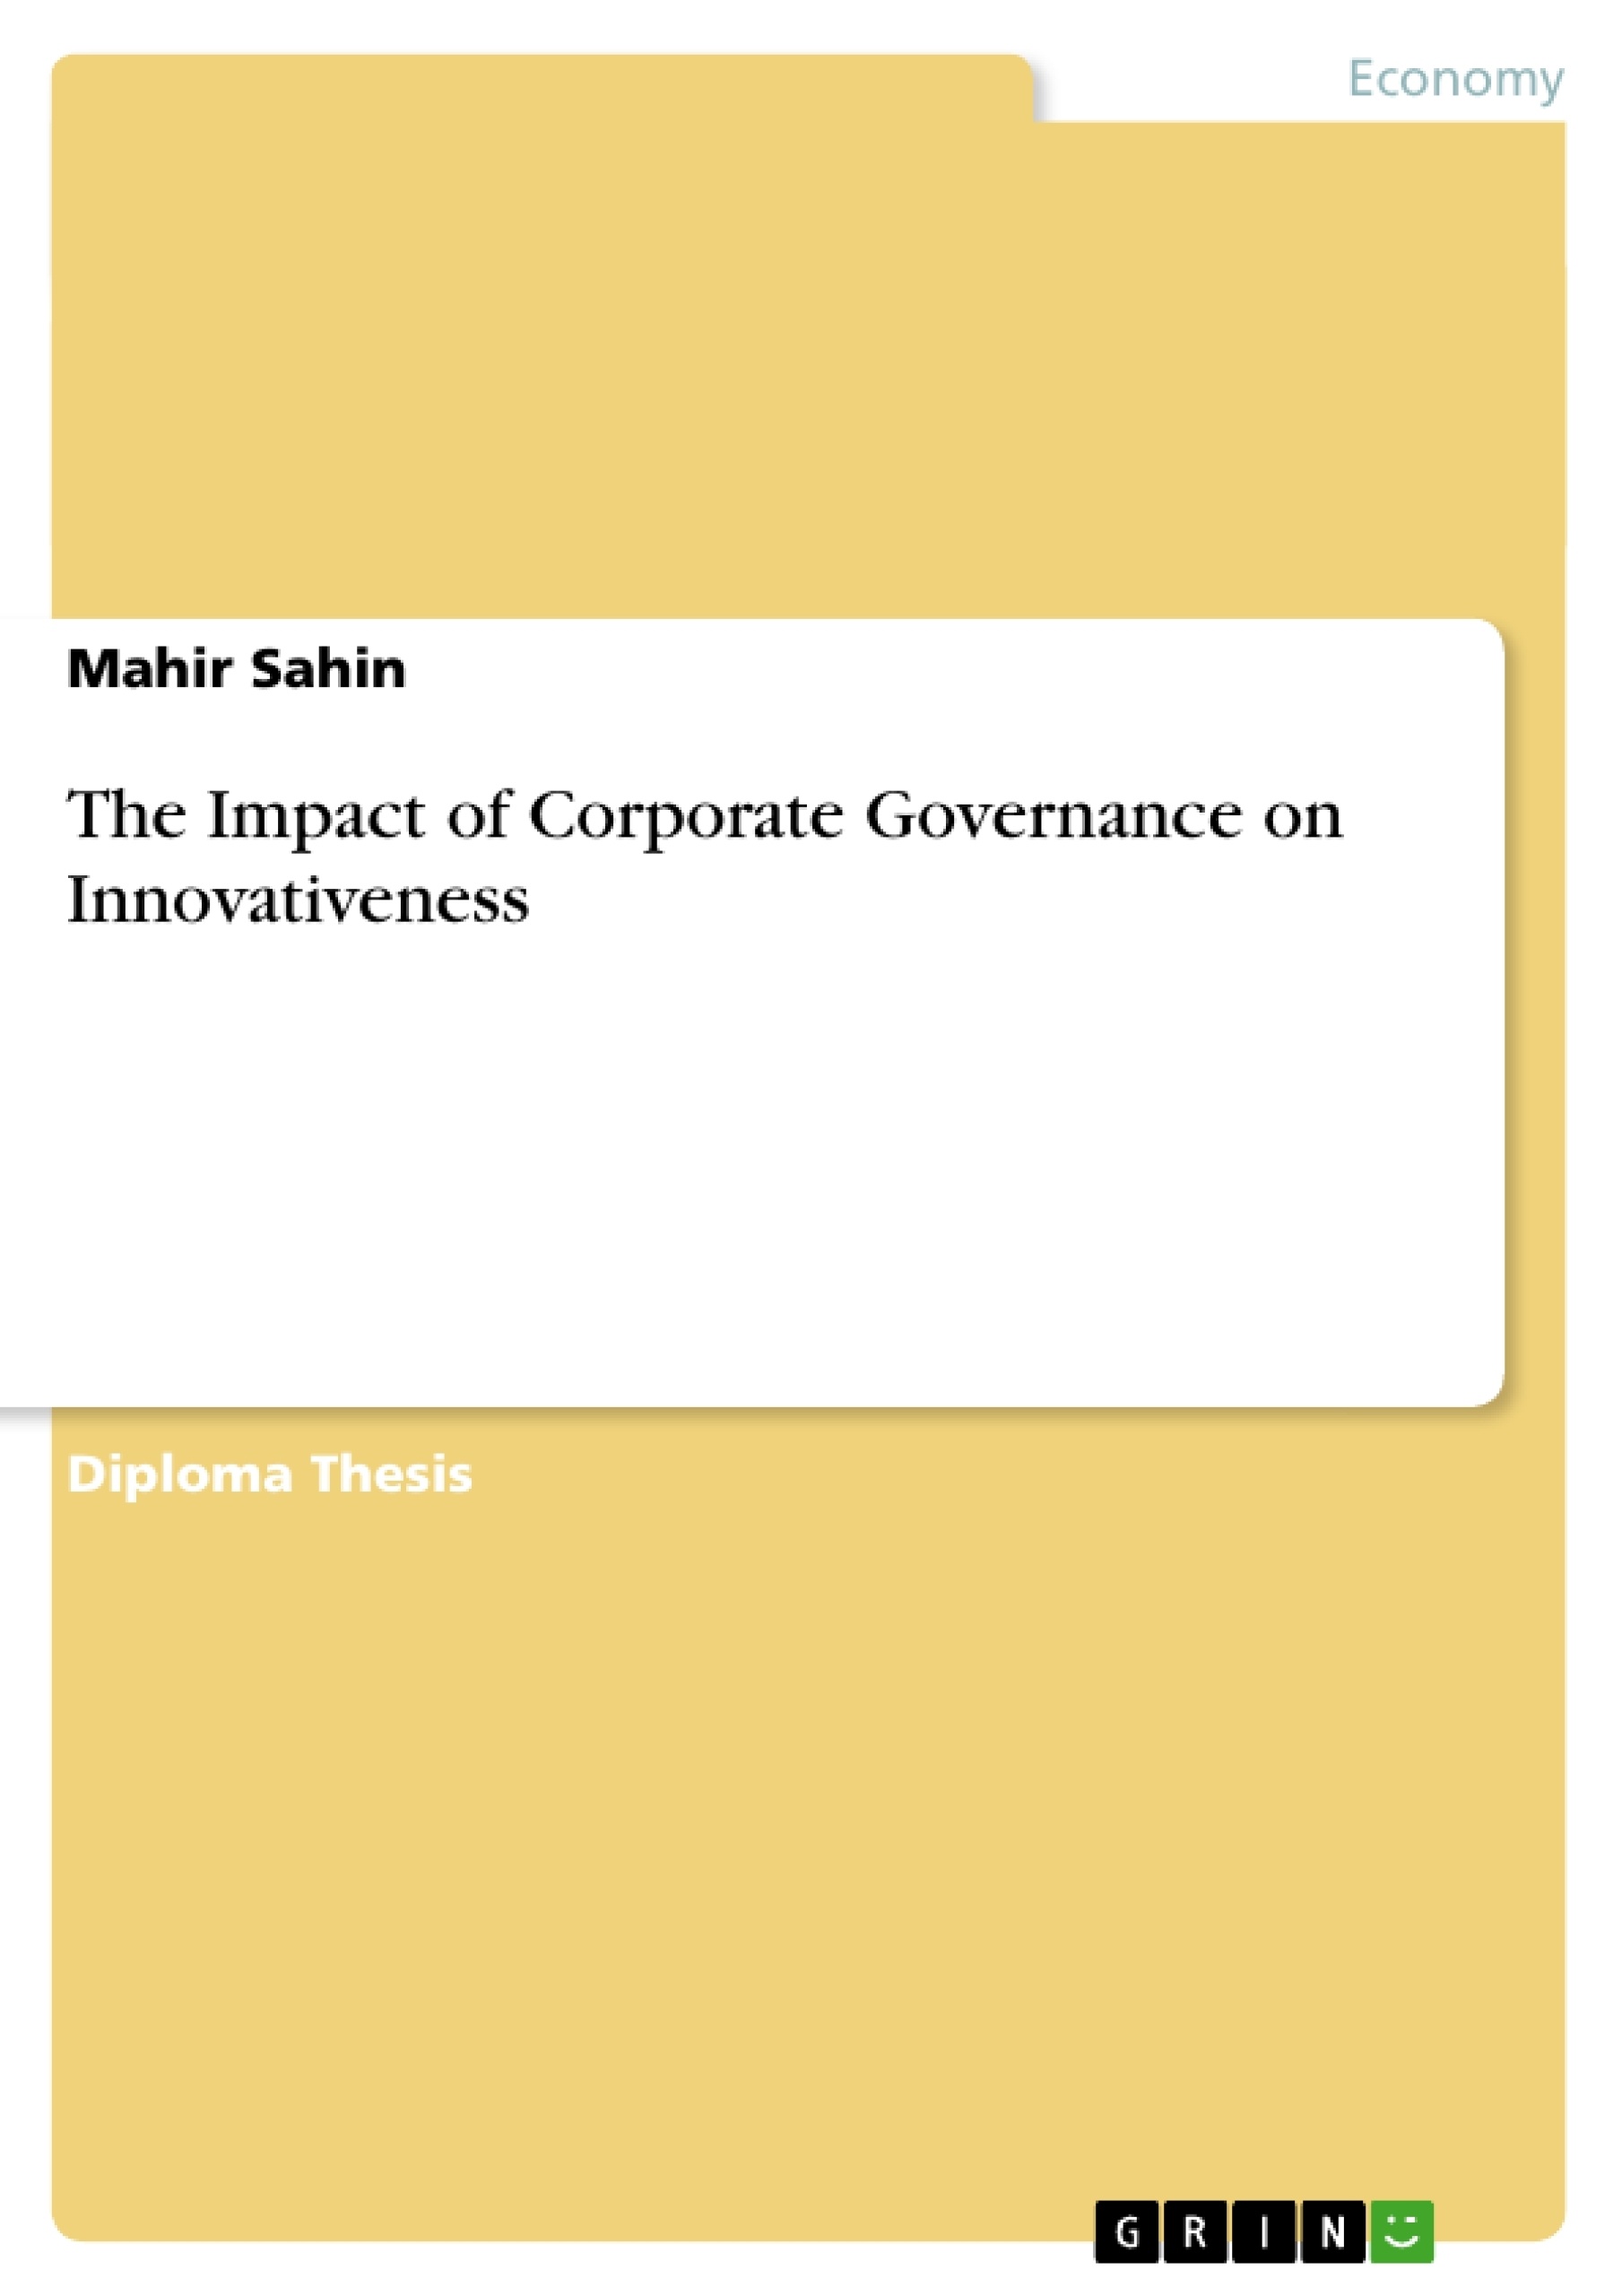 Title: The Impact of Corporate Governance on Innovativeness